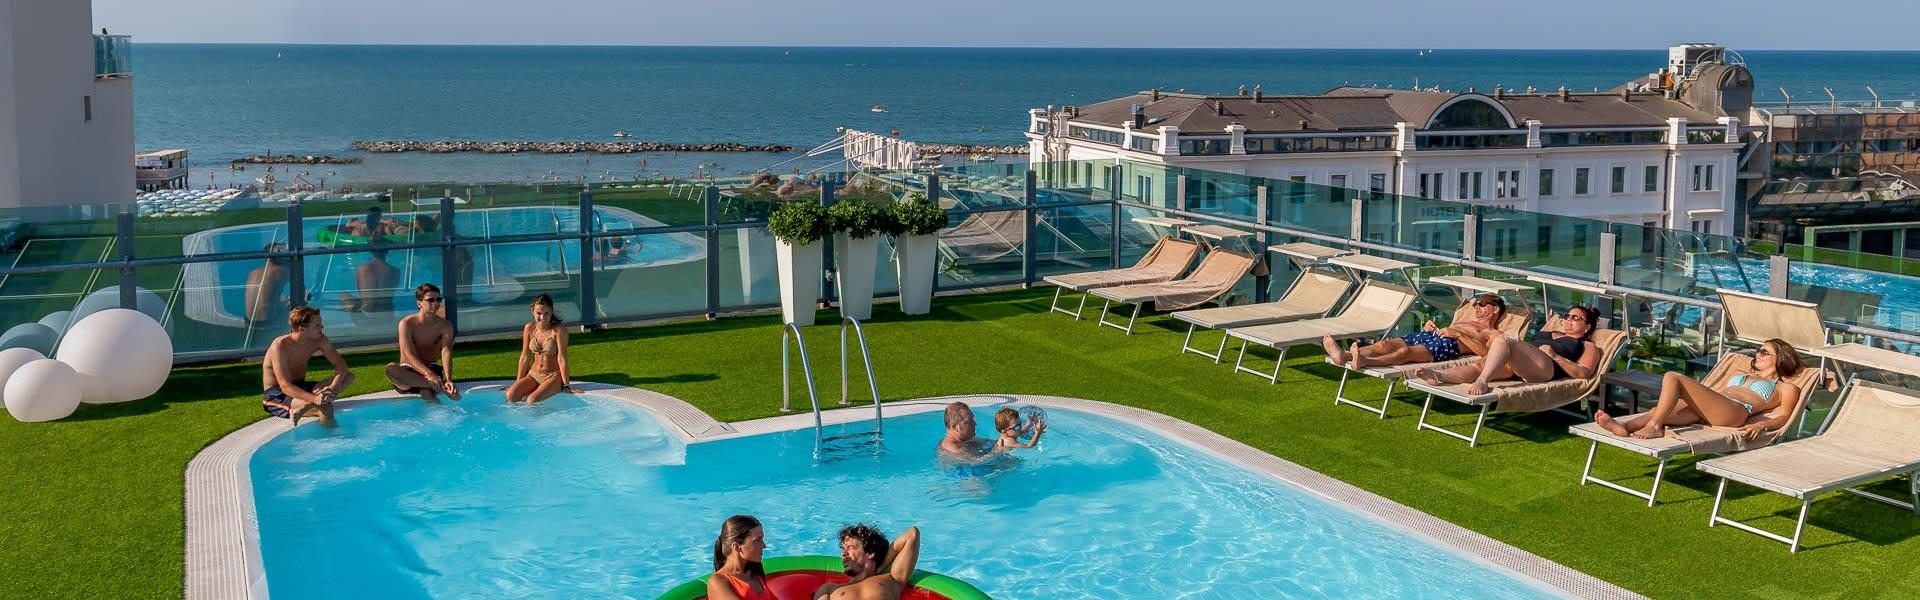 hotelsanmarcocattolica en early-booking-special-offer-hotel-cattolica 003